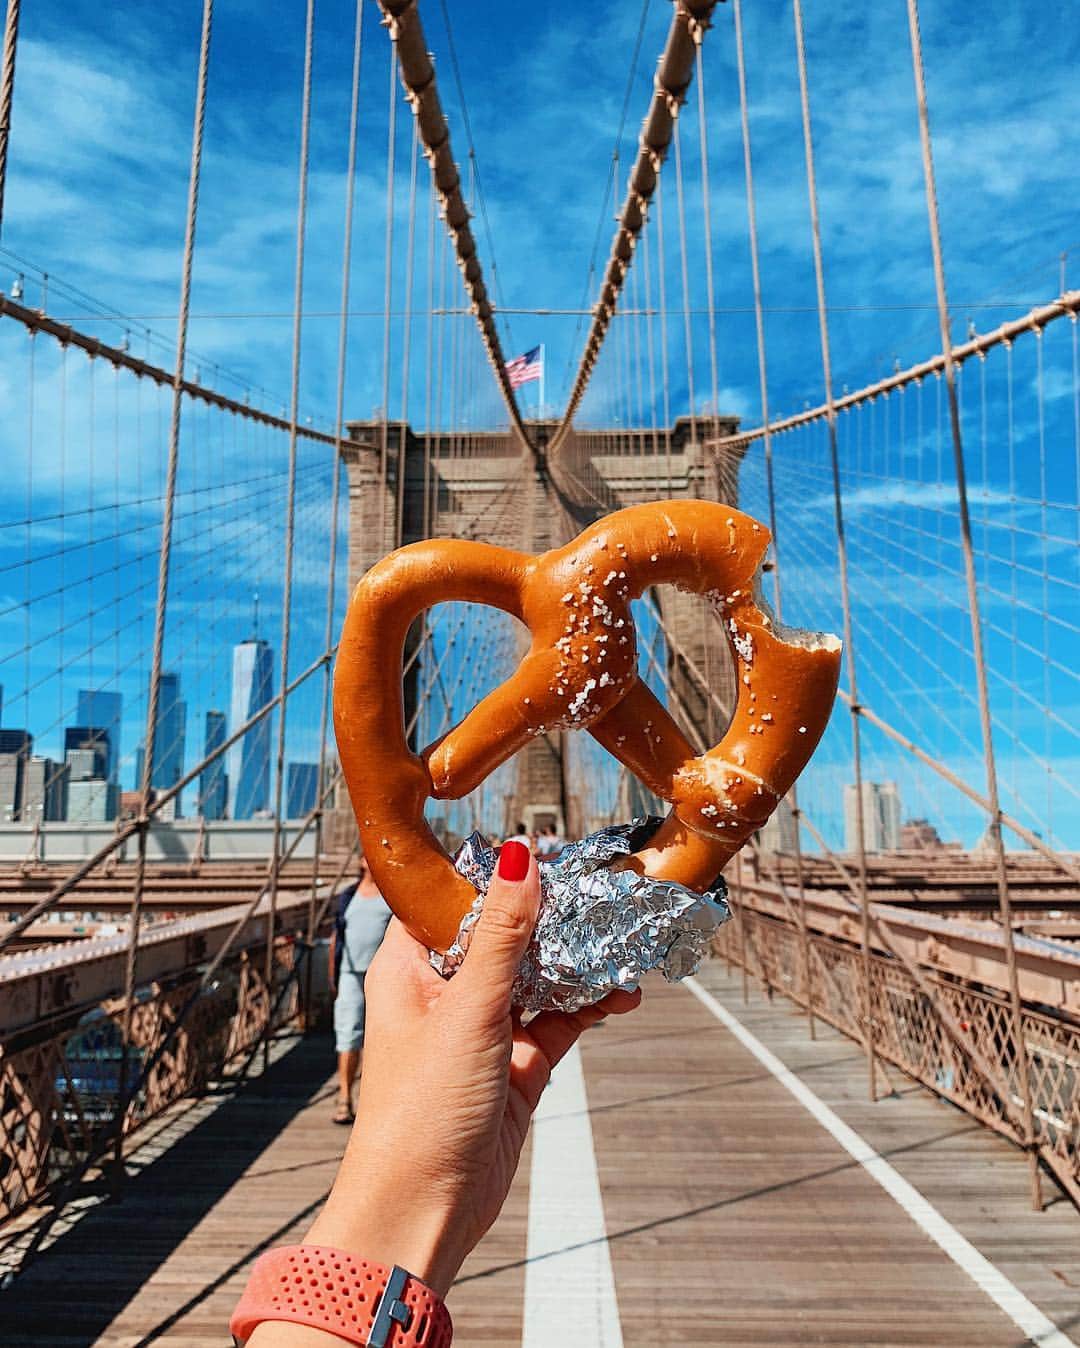 Girleatworldのインスタグラム：「🥨 in 🇺🇸🗽 Pretzels at Brooklyn Bridge in New York City. I've been wanting to visit this place ever since a follower tagged me on a photo here back in 2014. Finally got to realize that dream four years later 😌 Thanks for the inspiration @tammeeek!  This is Brooklyn Bridge, one of the oldest suspension bridge in USA that connects Brooklyn to Manhattan. It was opened 135 years ago in 1883 to accomodate commuters who worked in Manhattan but lived outside the borough.  Pretzels first made landfall in America in Philadelphia, but this style with coarse salt is a New Yorker thing.  #shotoniphone #iphonexsmax #pretzels #🥨 #newyork #brooklynbridge #🗽 #🇺🇸」